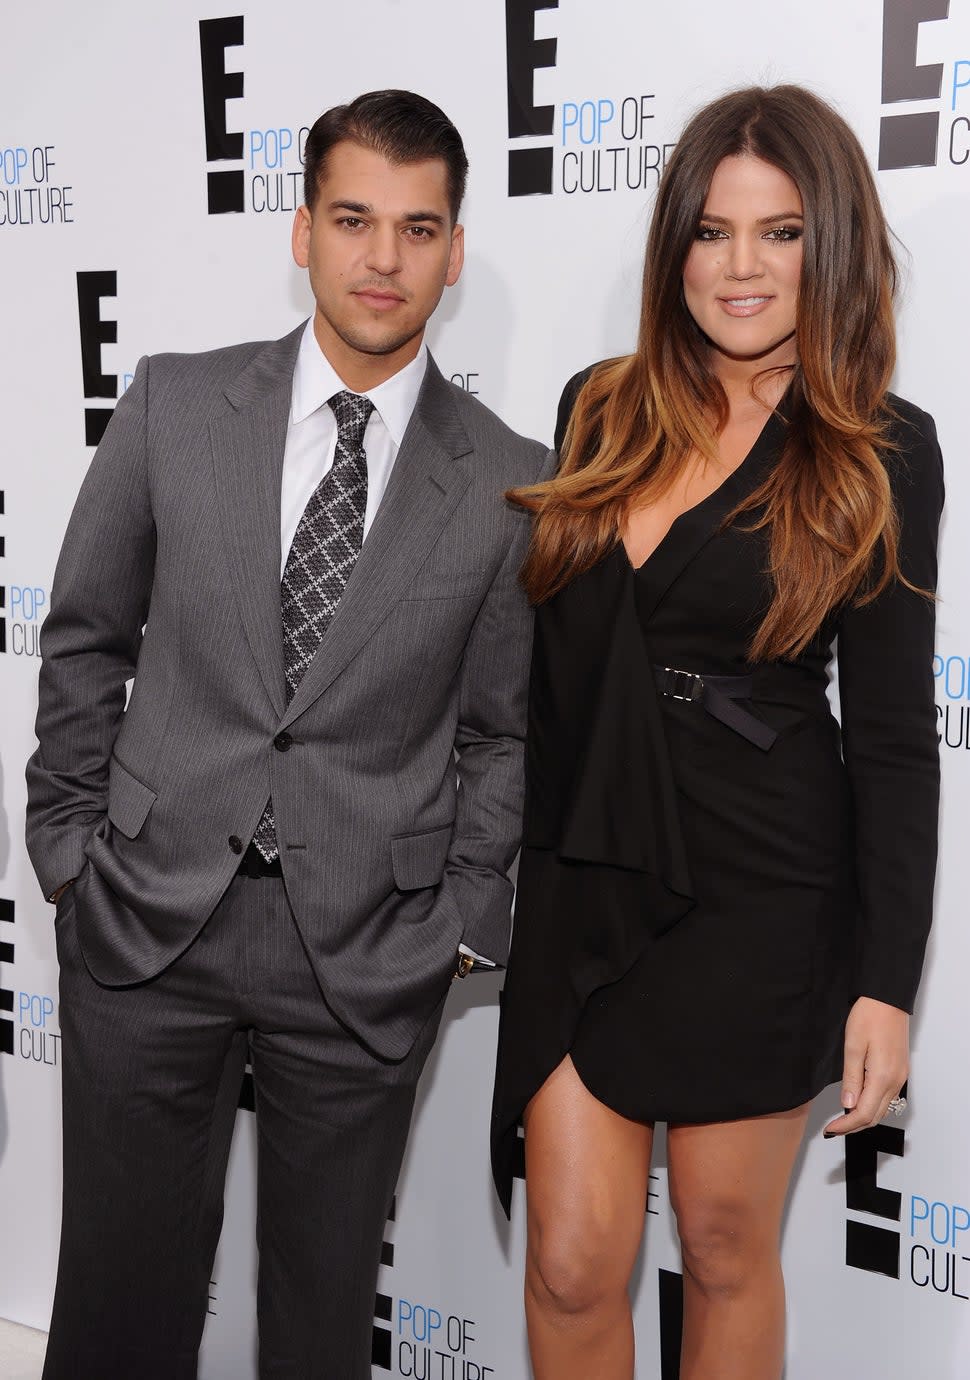 Rob Kardashian and Khloe Kardashian of Keeping Up With The Kardashians attend E! 2012 Upfront at NYC Gotham Hall on April 30, 2012 in New York City. 